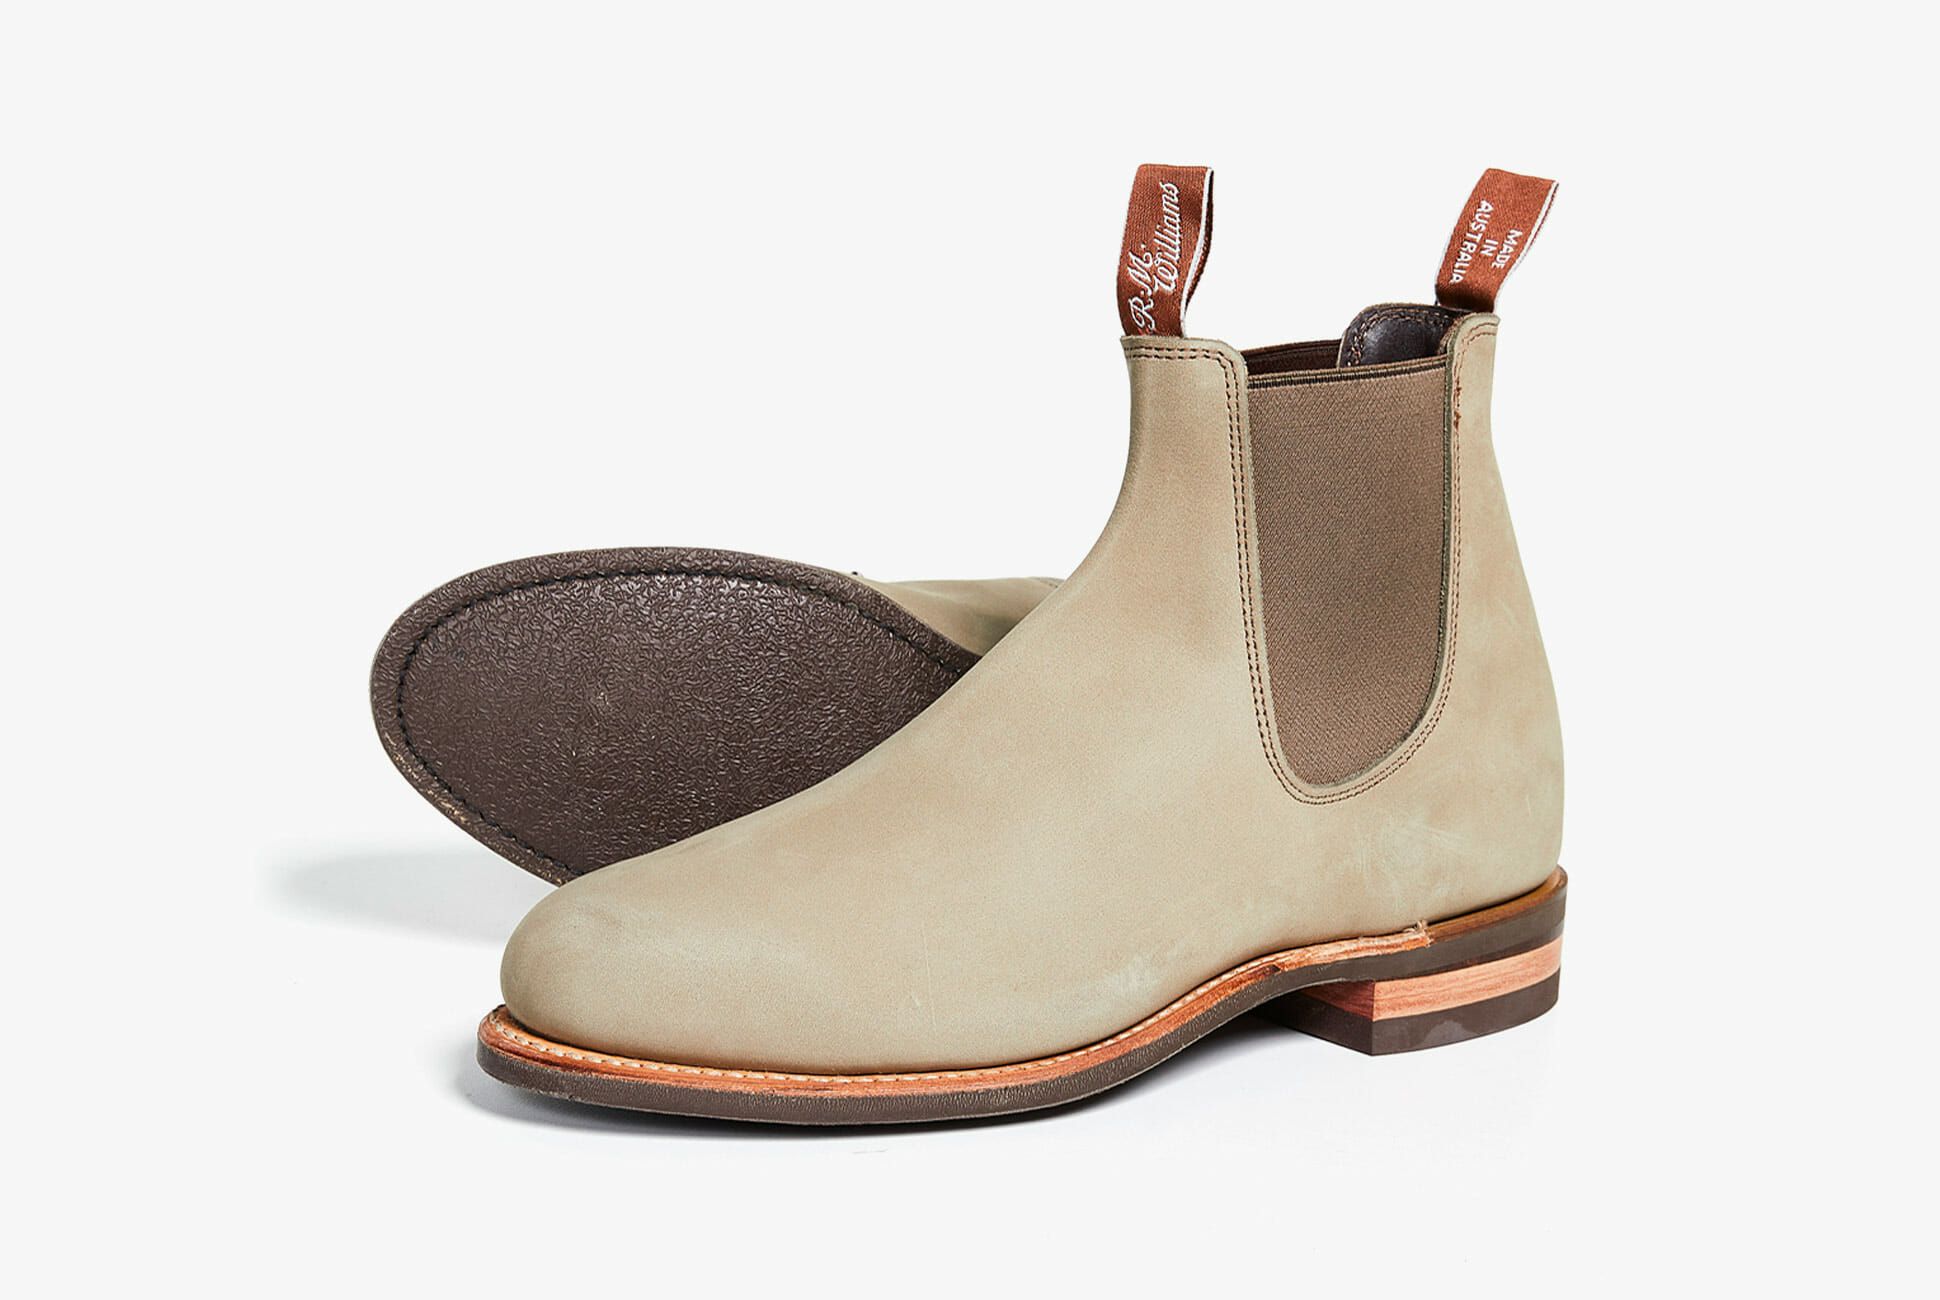 R.M Williams Turnout boots